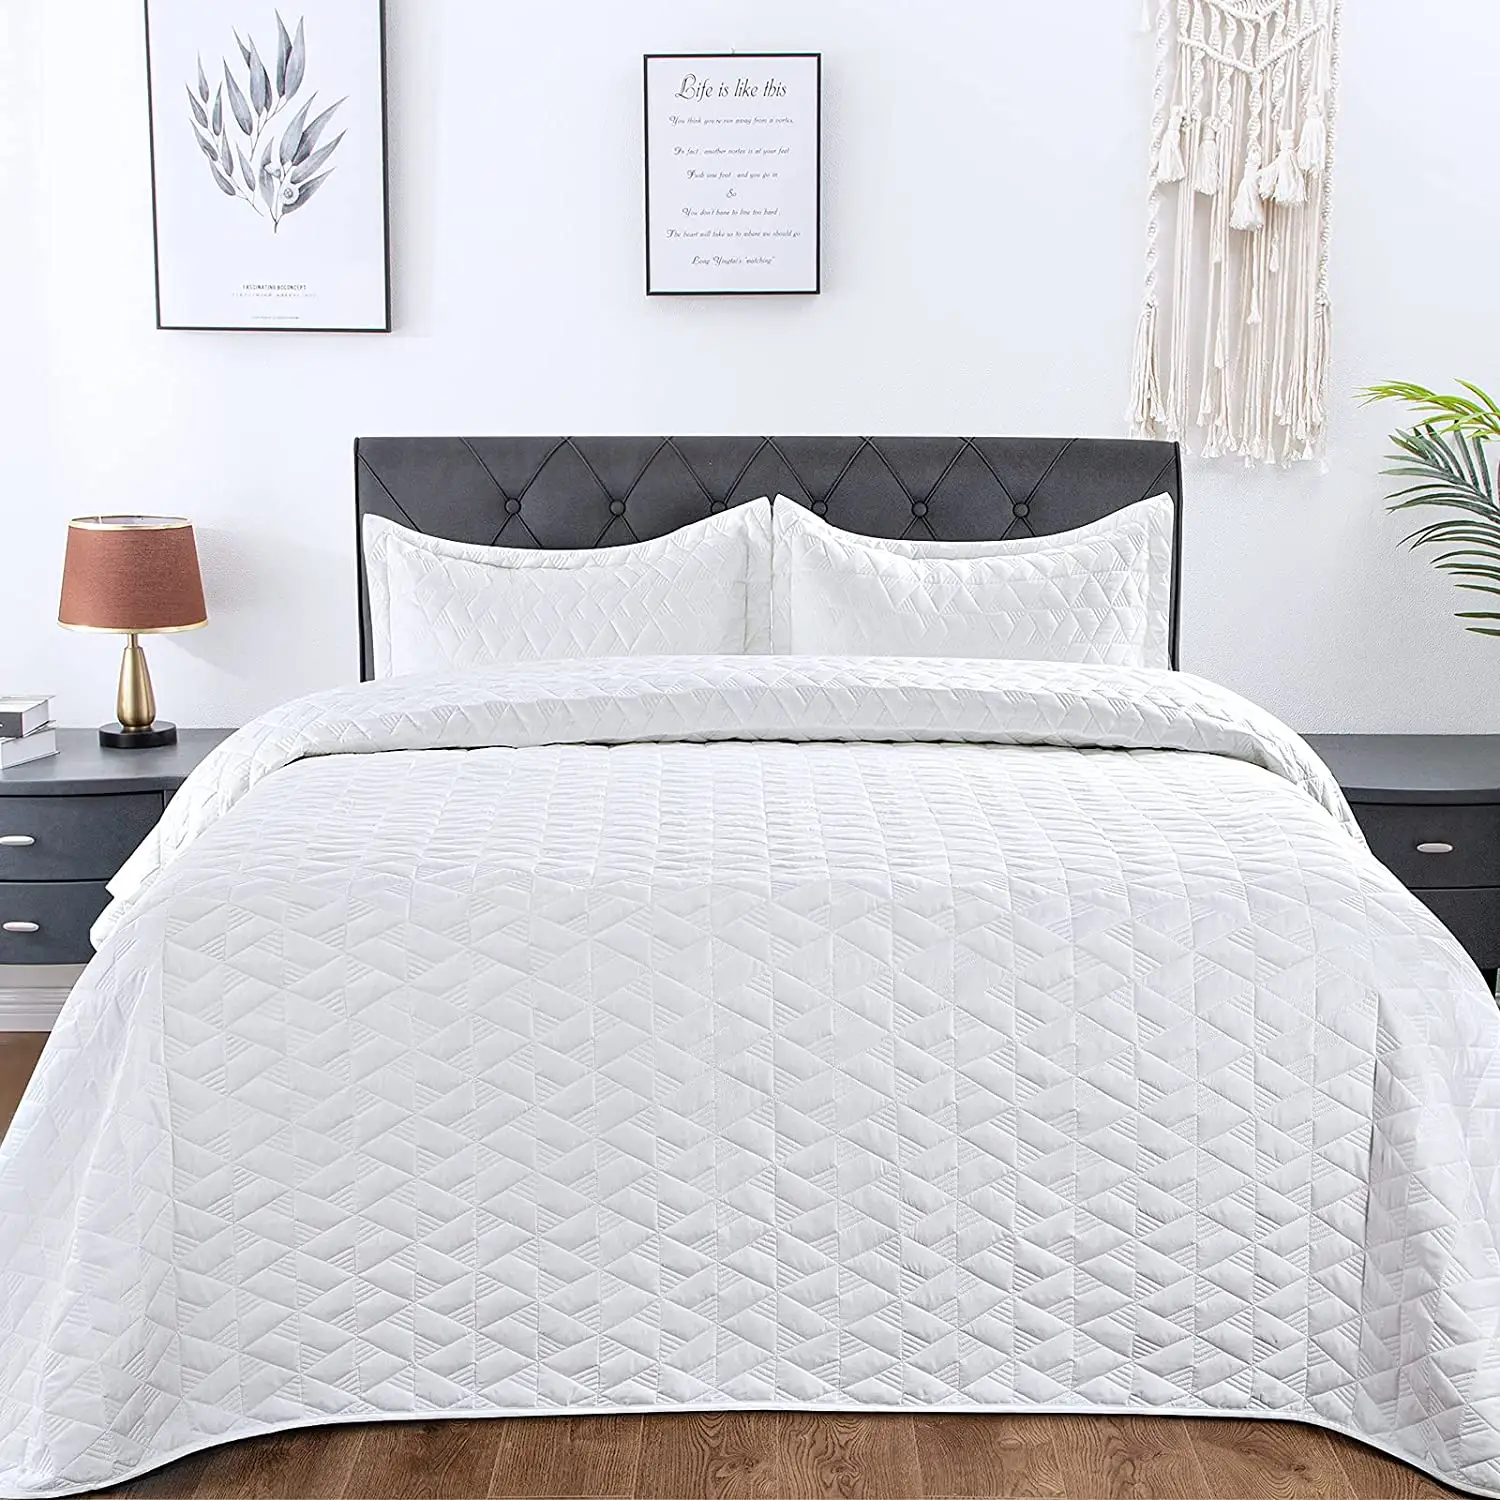 White Quilt Set Geometric Pattern Stitched Bedspread Lightweight Breathable Summer Comforter Coverlet Sets